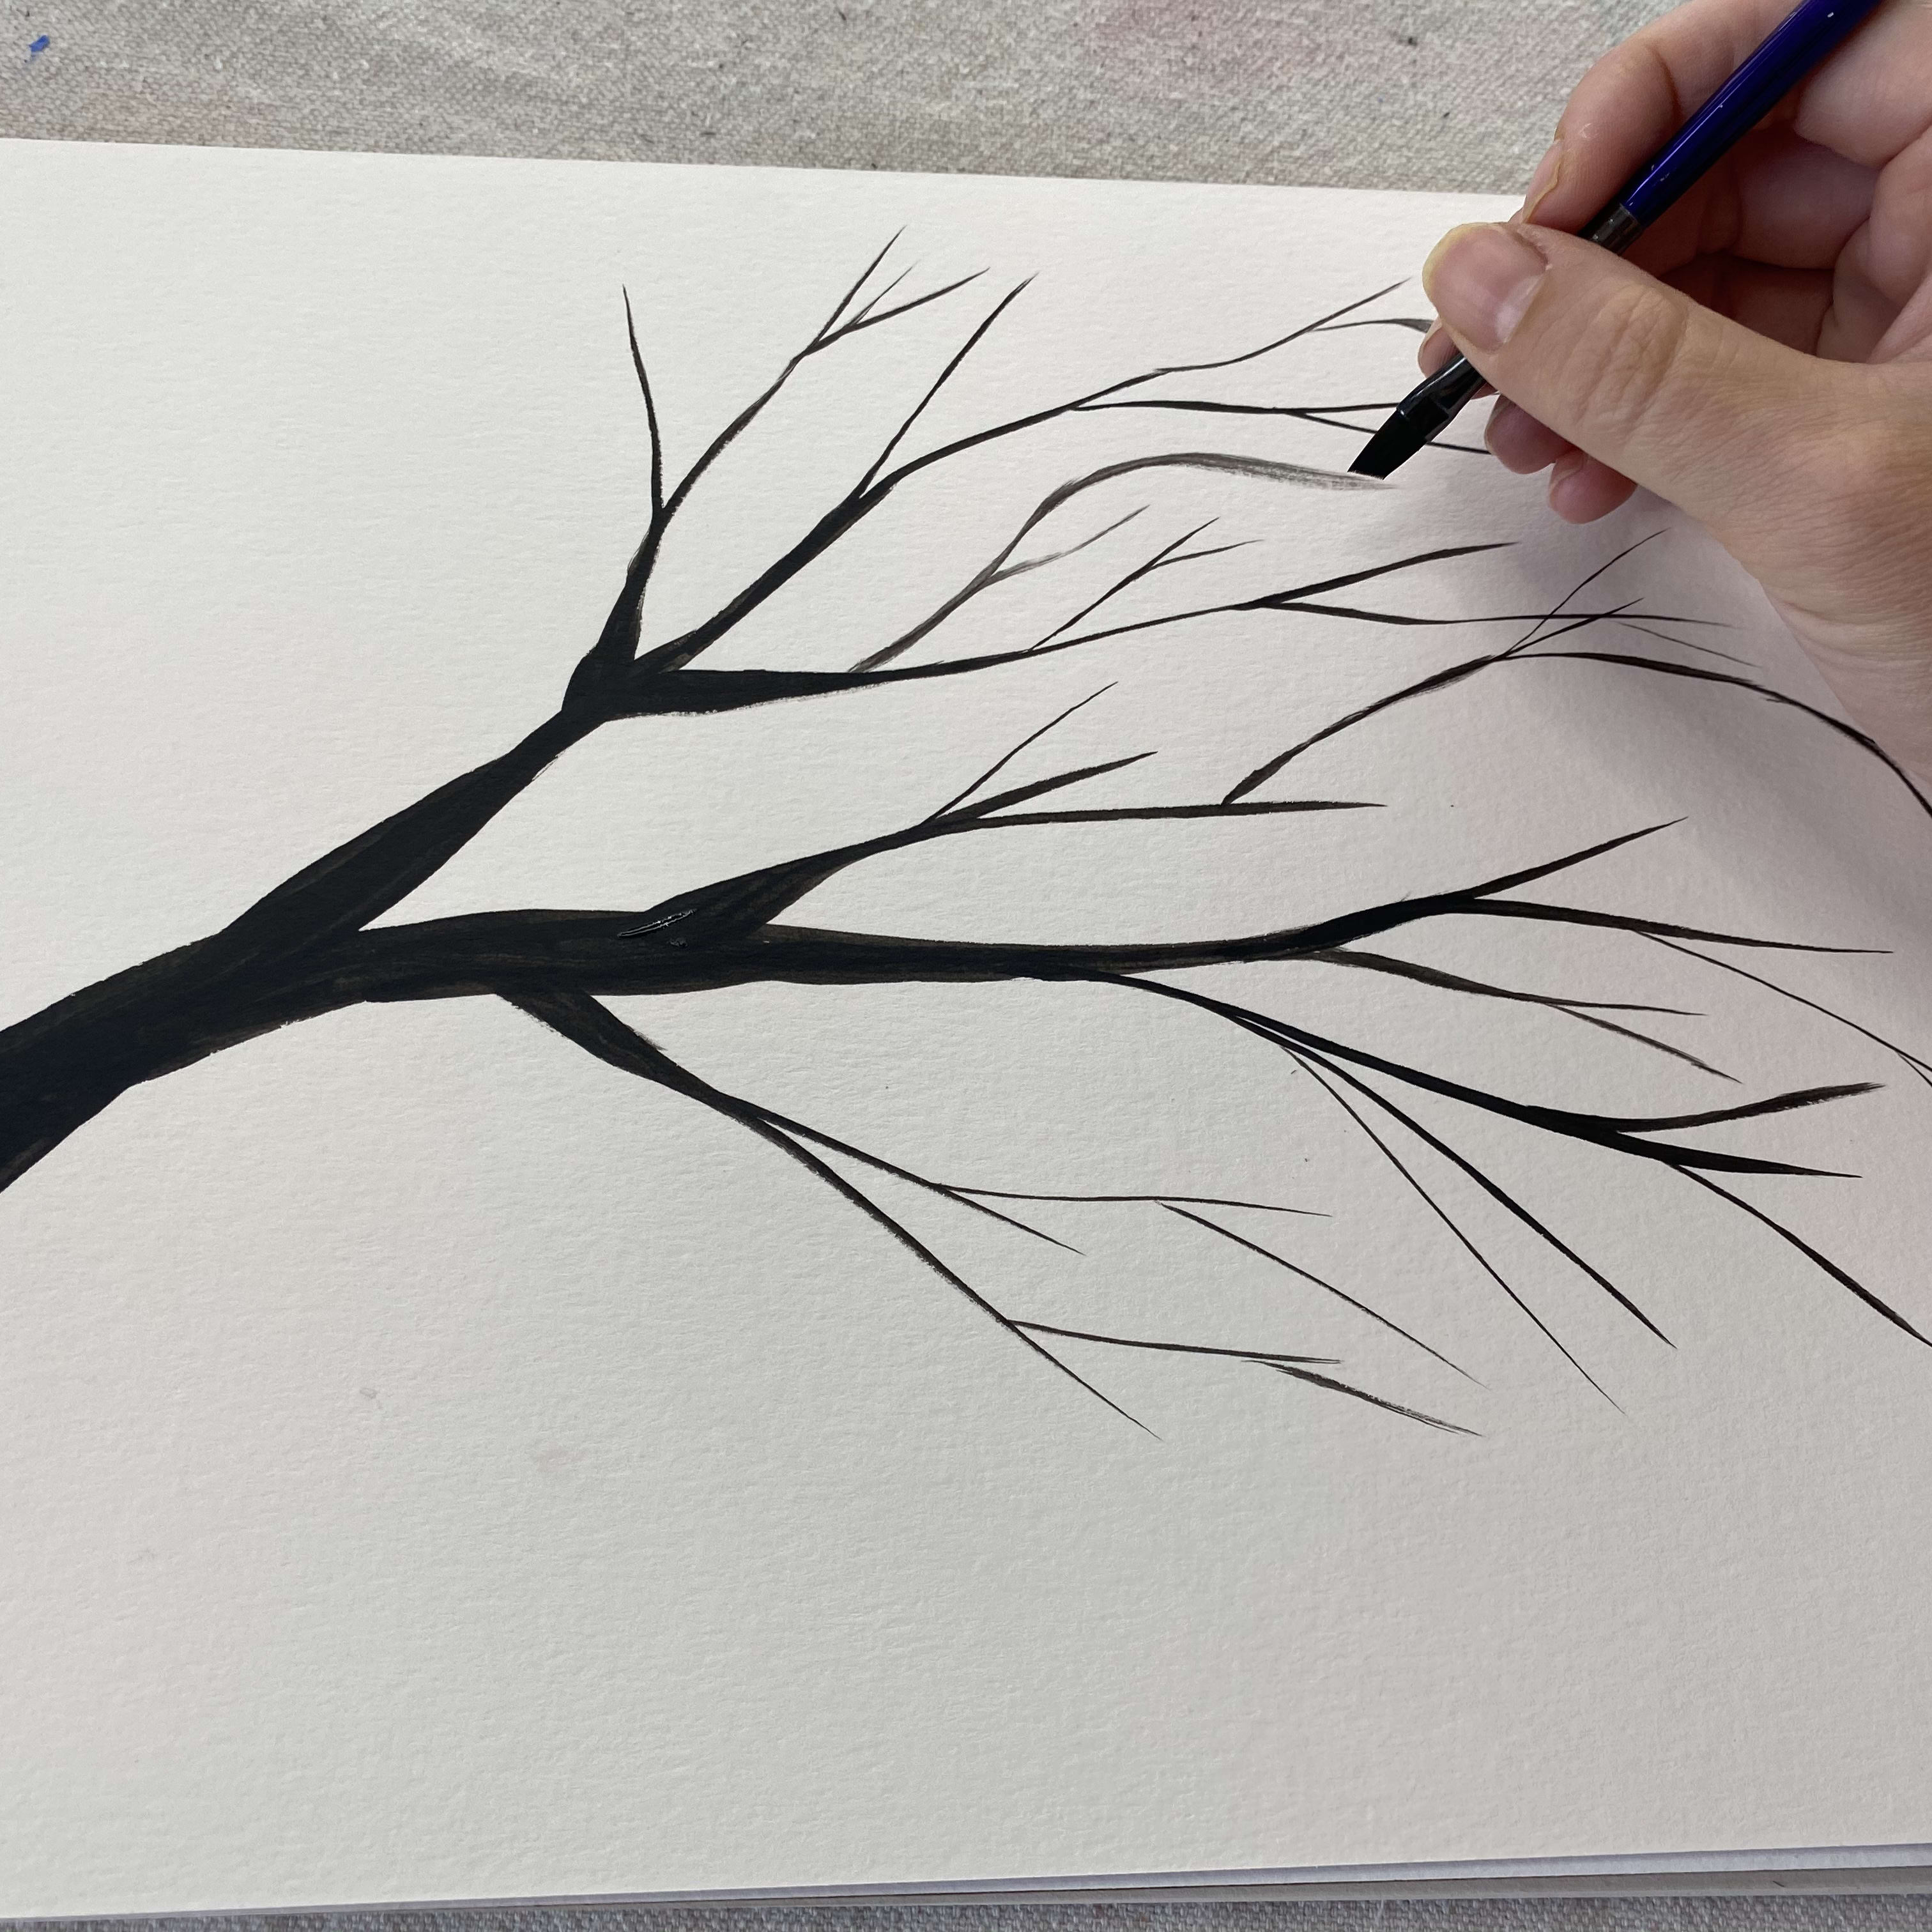 How to Make an Interesting Art Piece Using Tree Branches